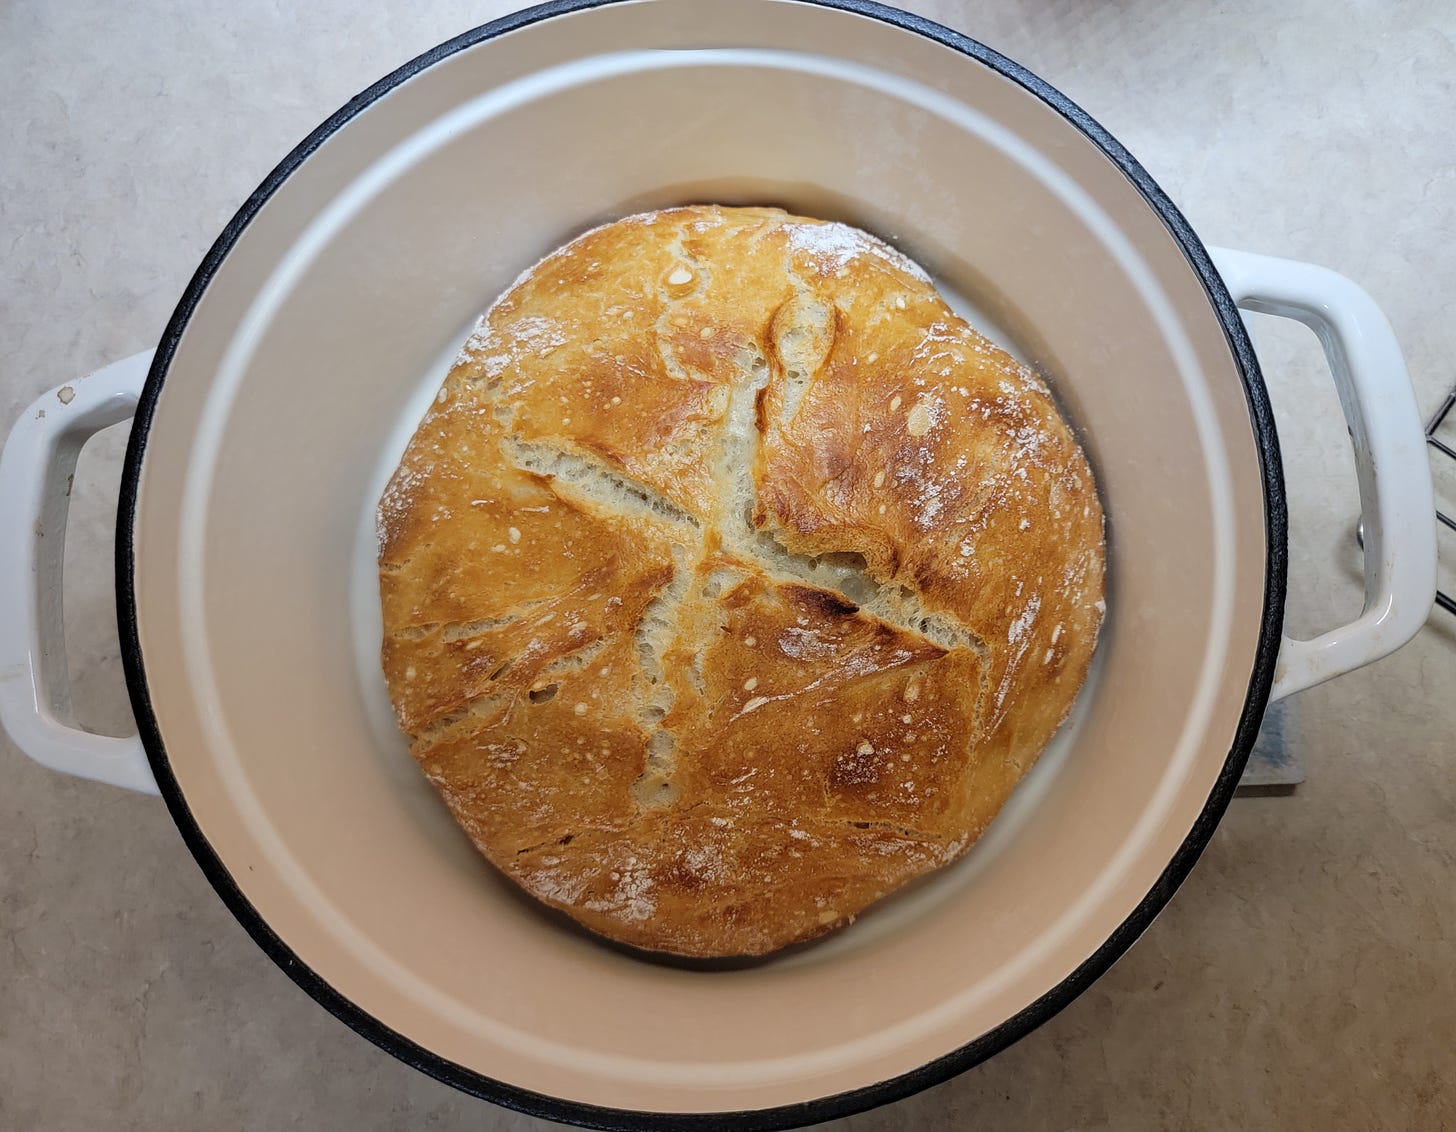 A loaf of bread sitting in a white Dutch oven pot on a kitchen counter.